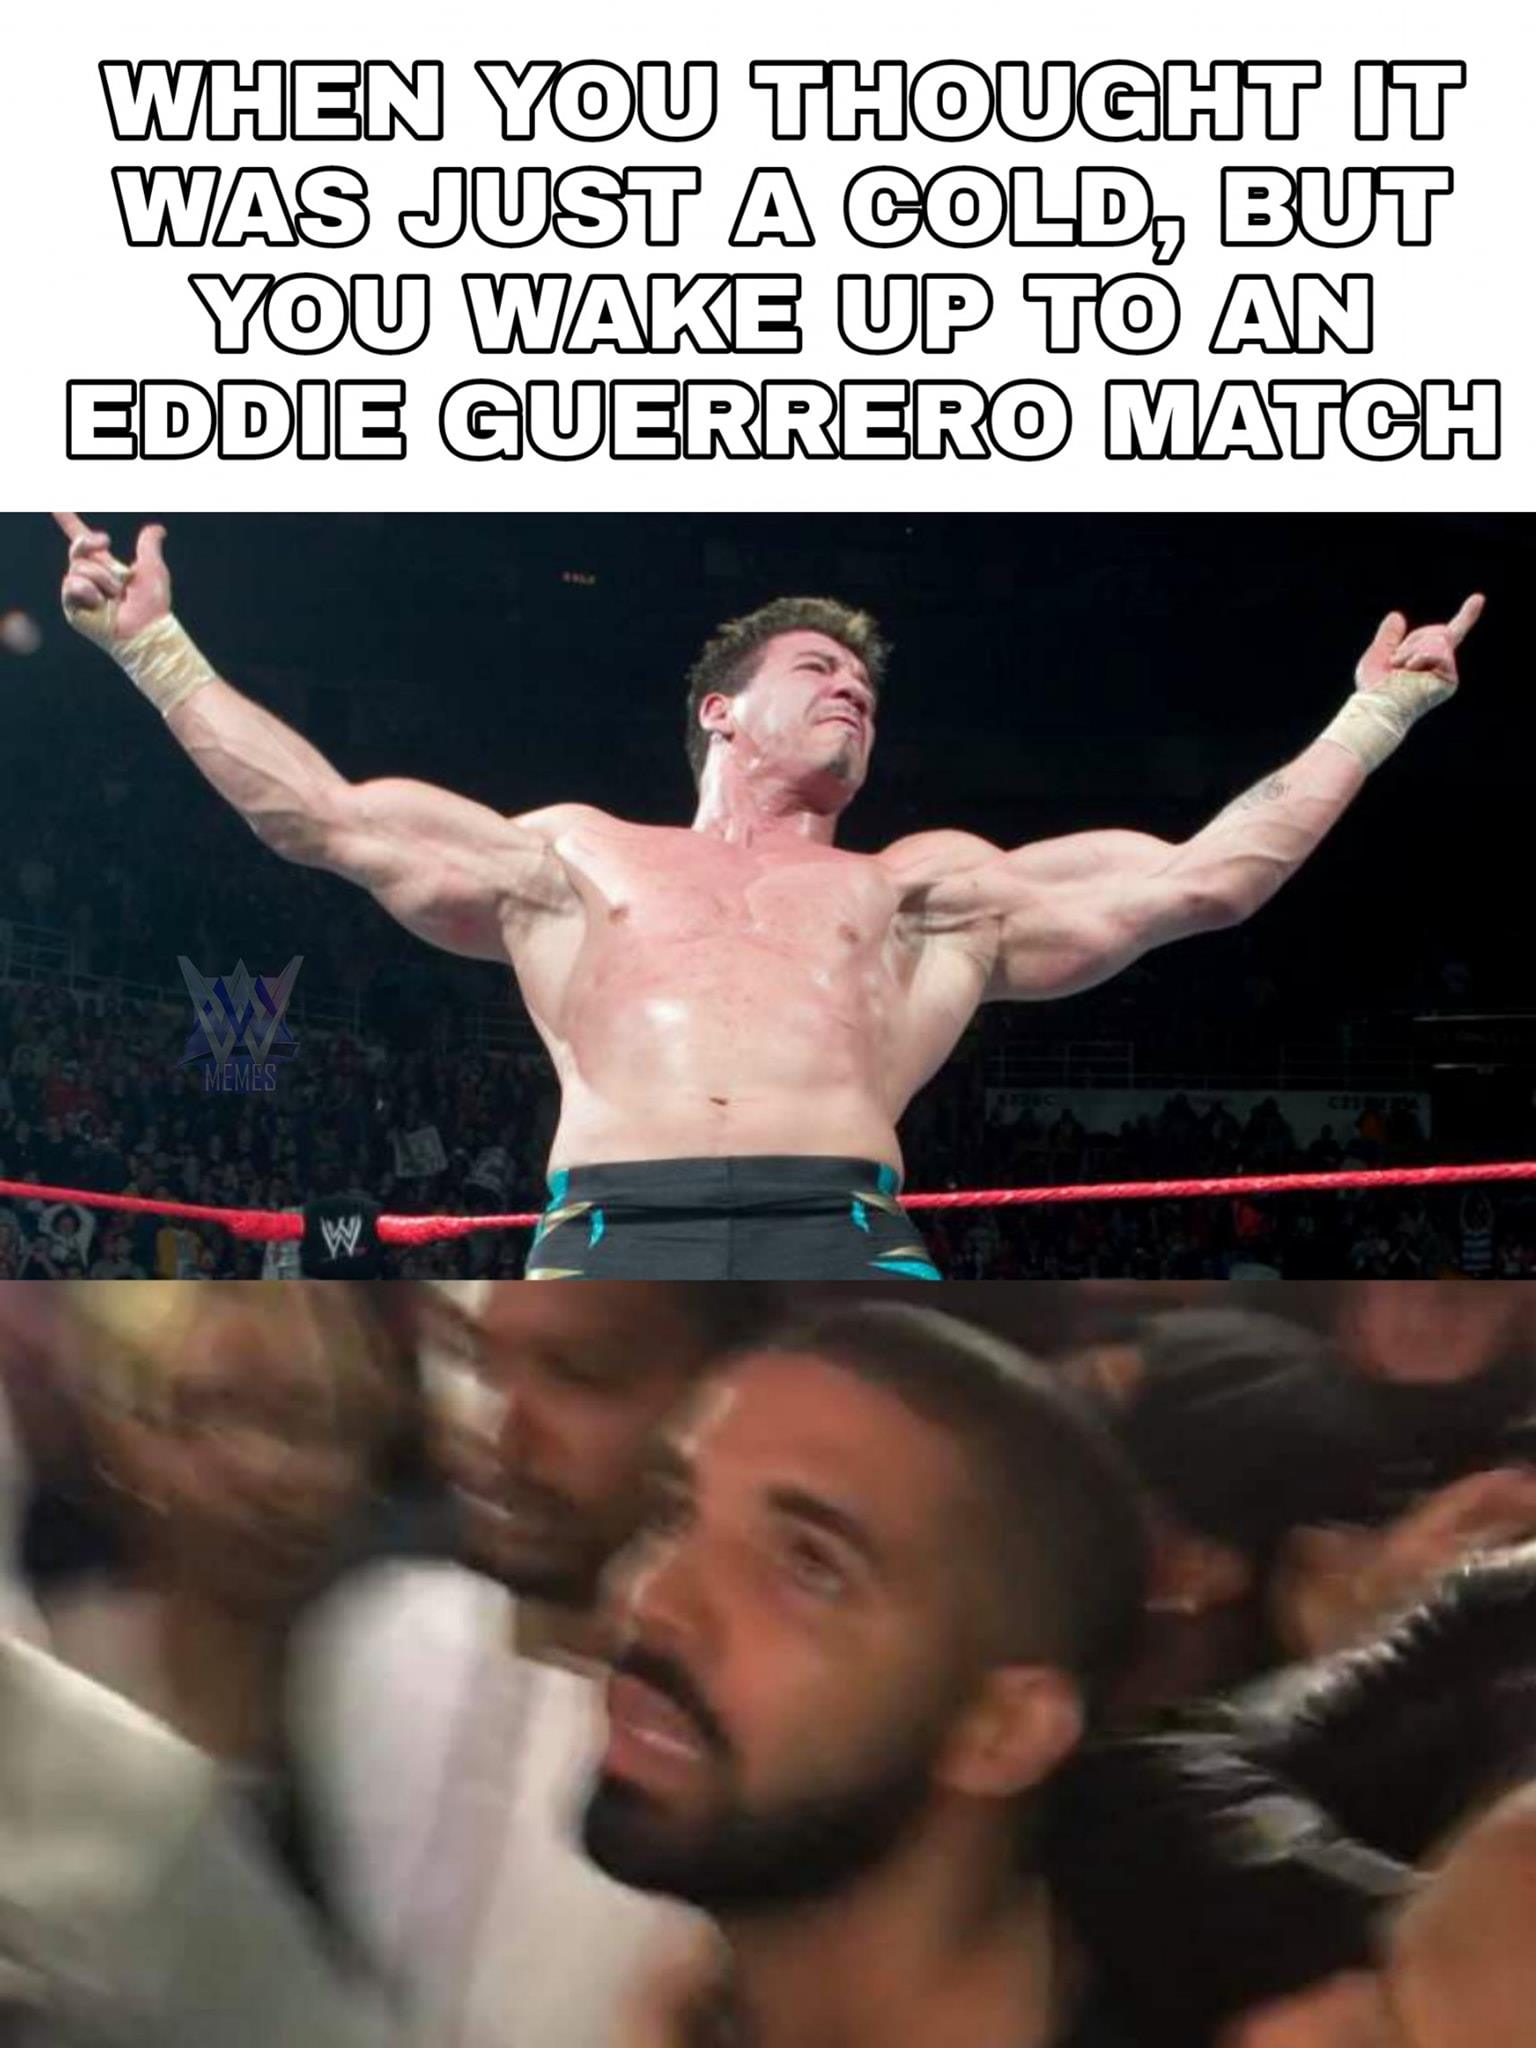 WWE wrestling memes - latino heat meme - When You Thought It Was Just A Cold, But You Wake Up To An Eddie Guerrero Match Memes W